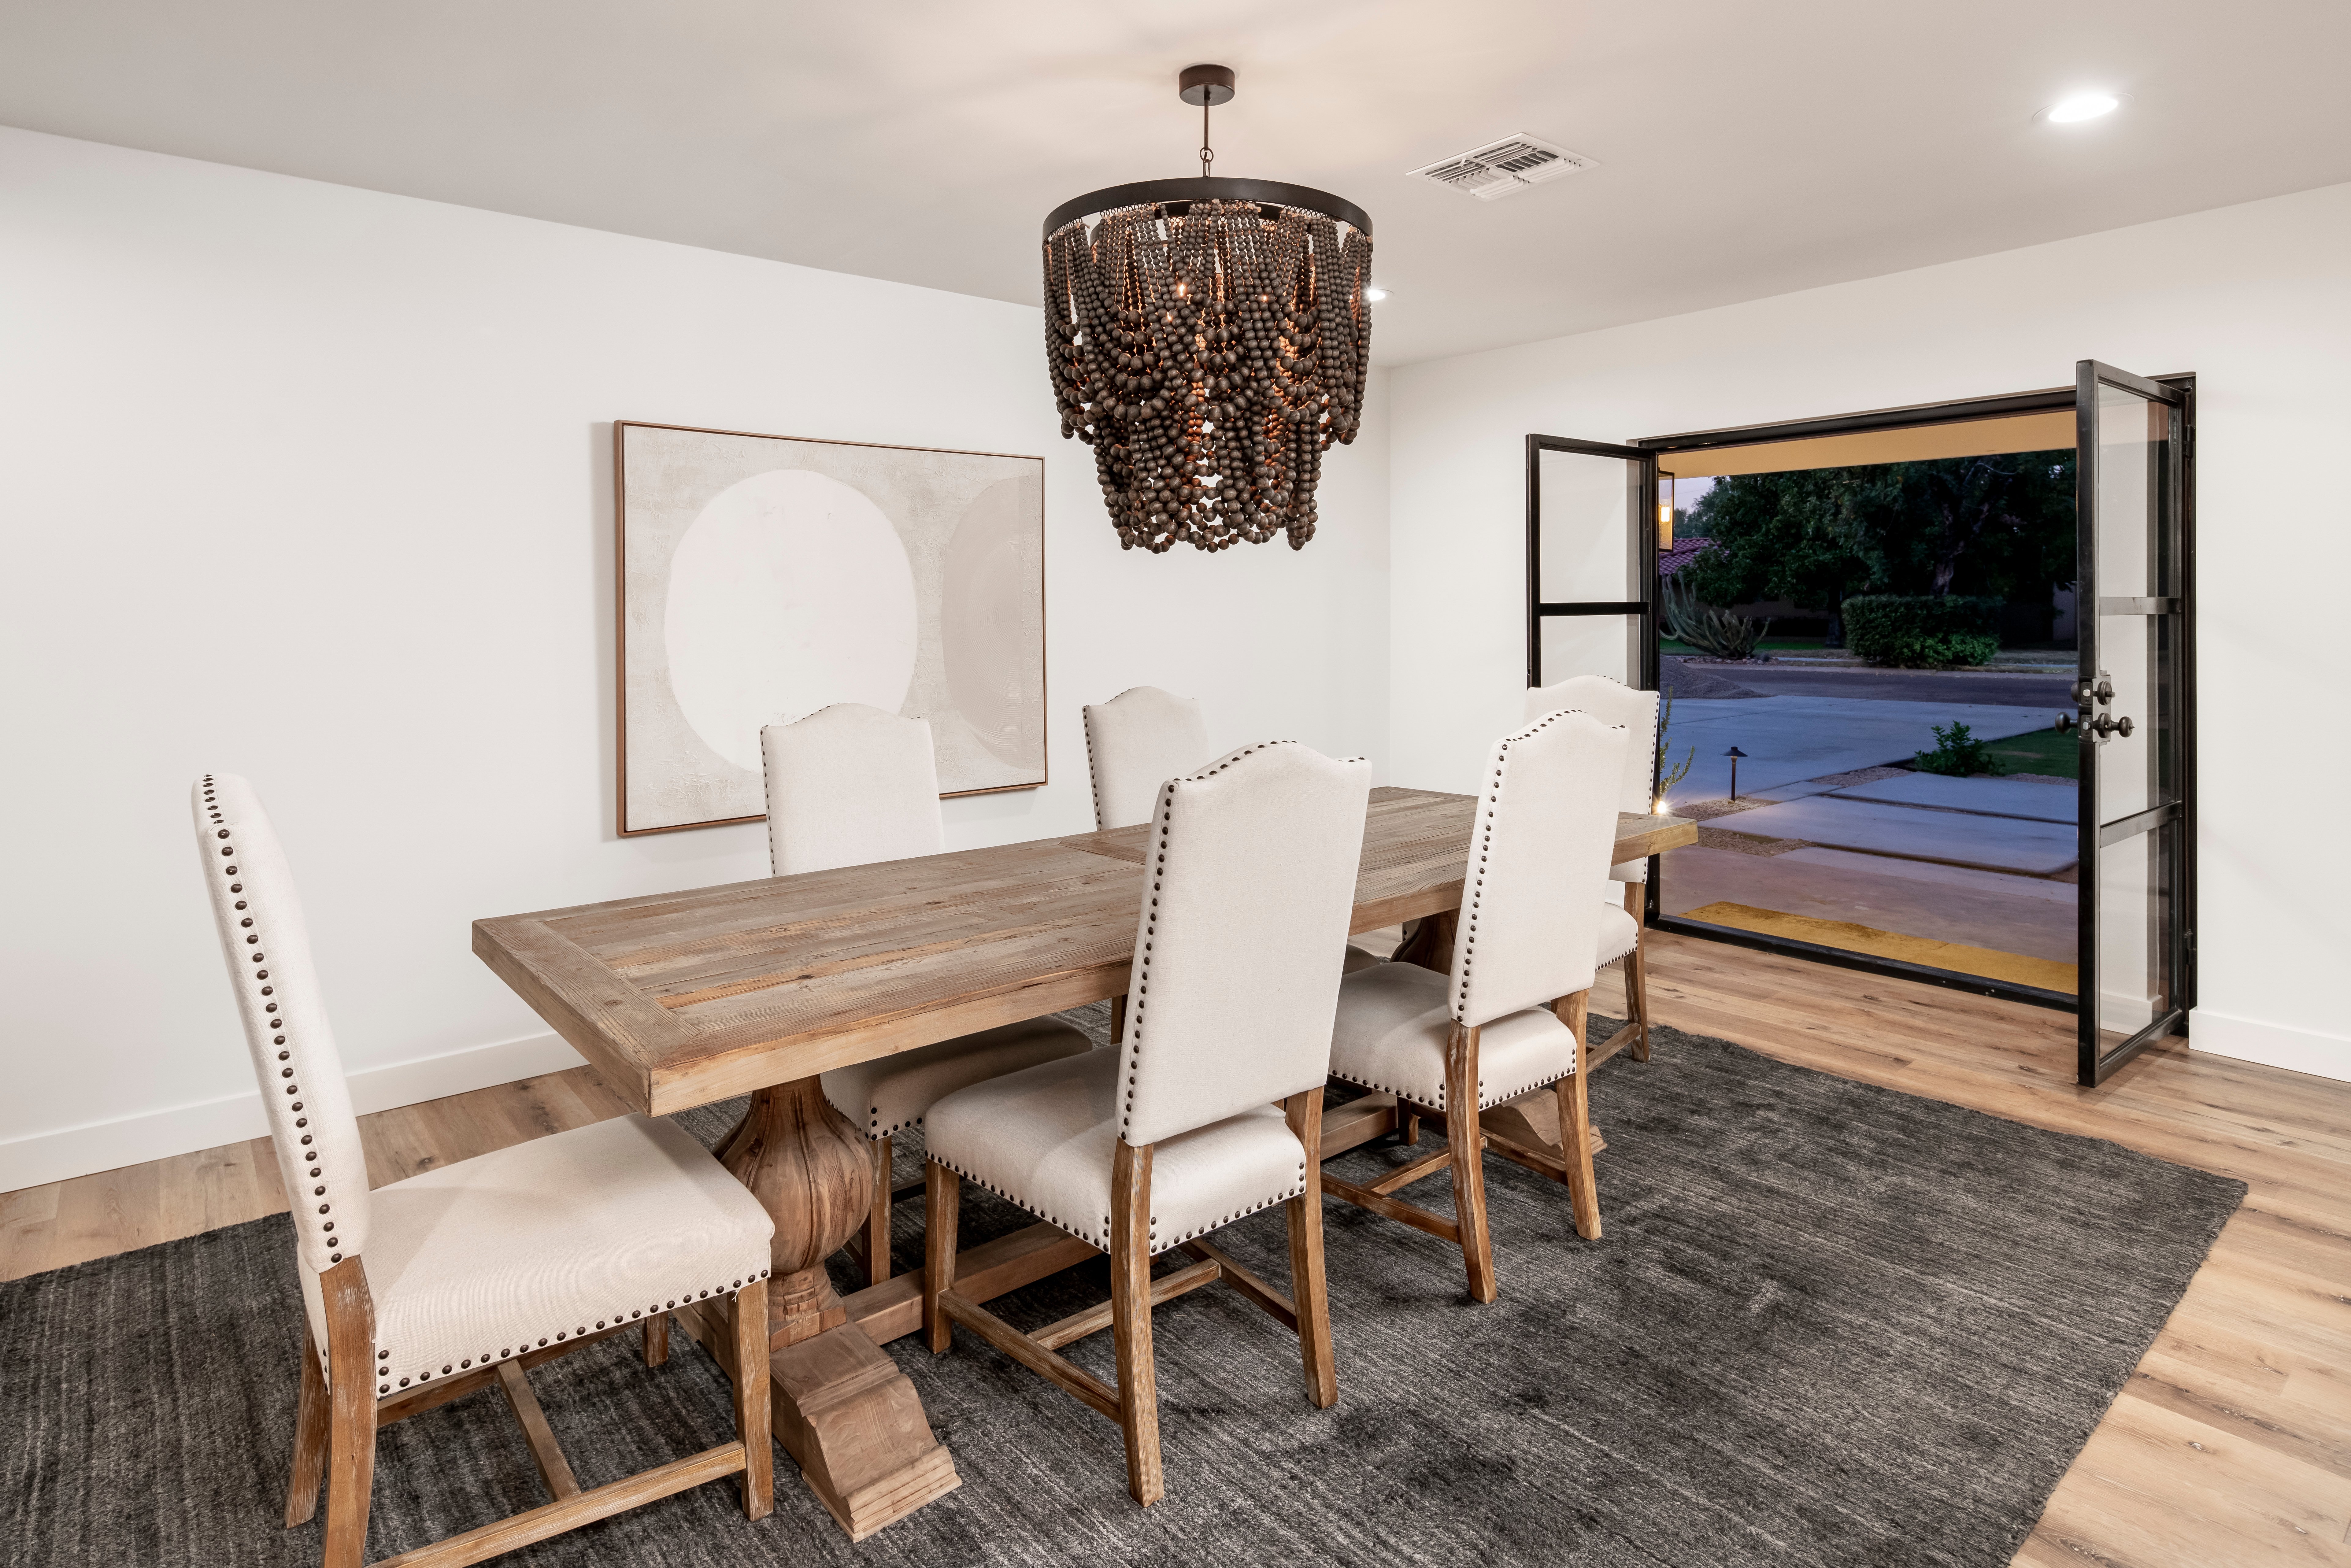 Elegant dining room decorated in whites and greys with a large wood table opens to the Arizona evening